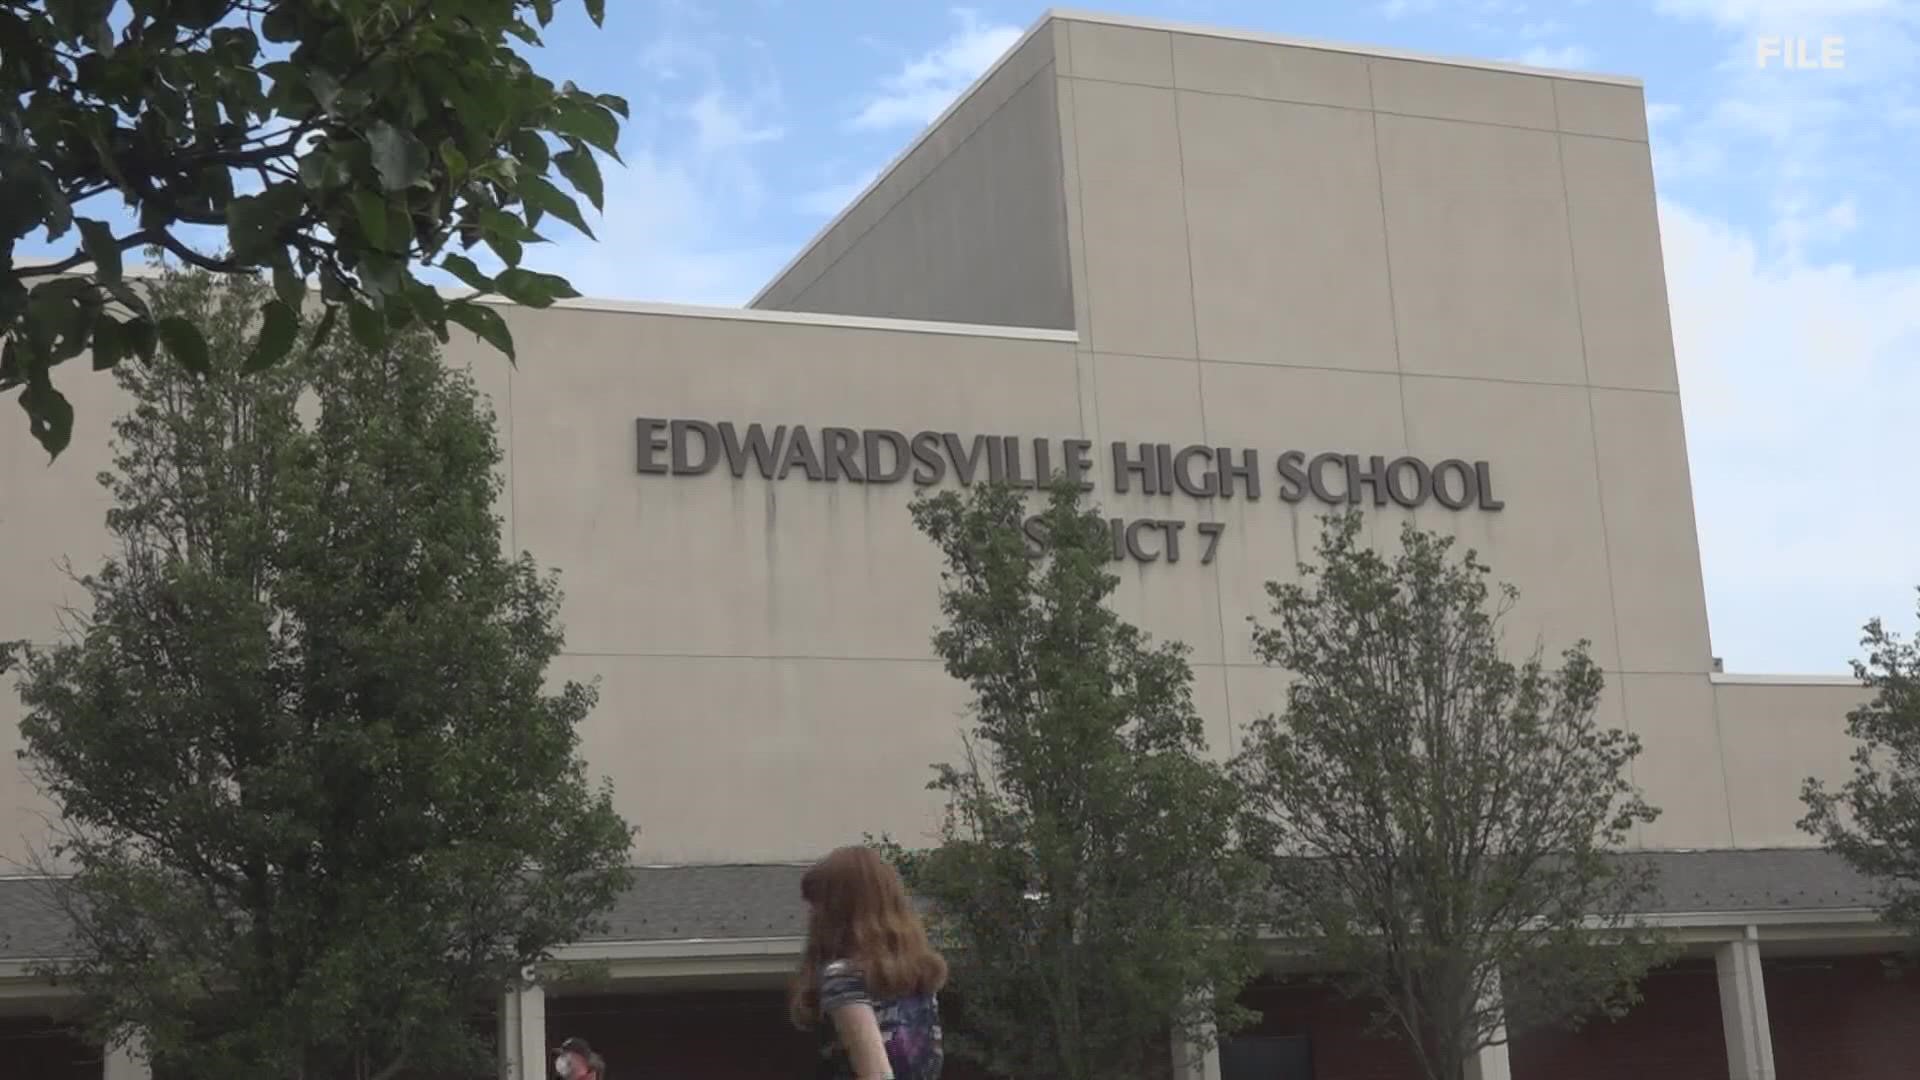 The 13 schools that make up Edwardsville School District started Wednesday, so they are still settling into this new school year.